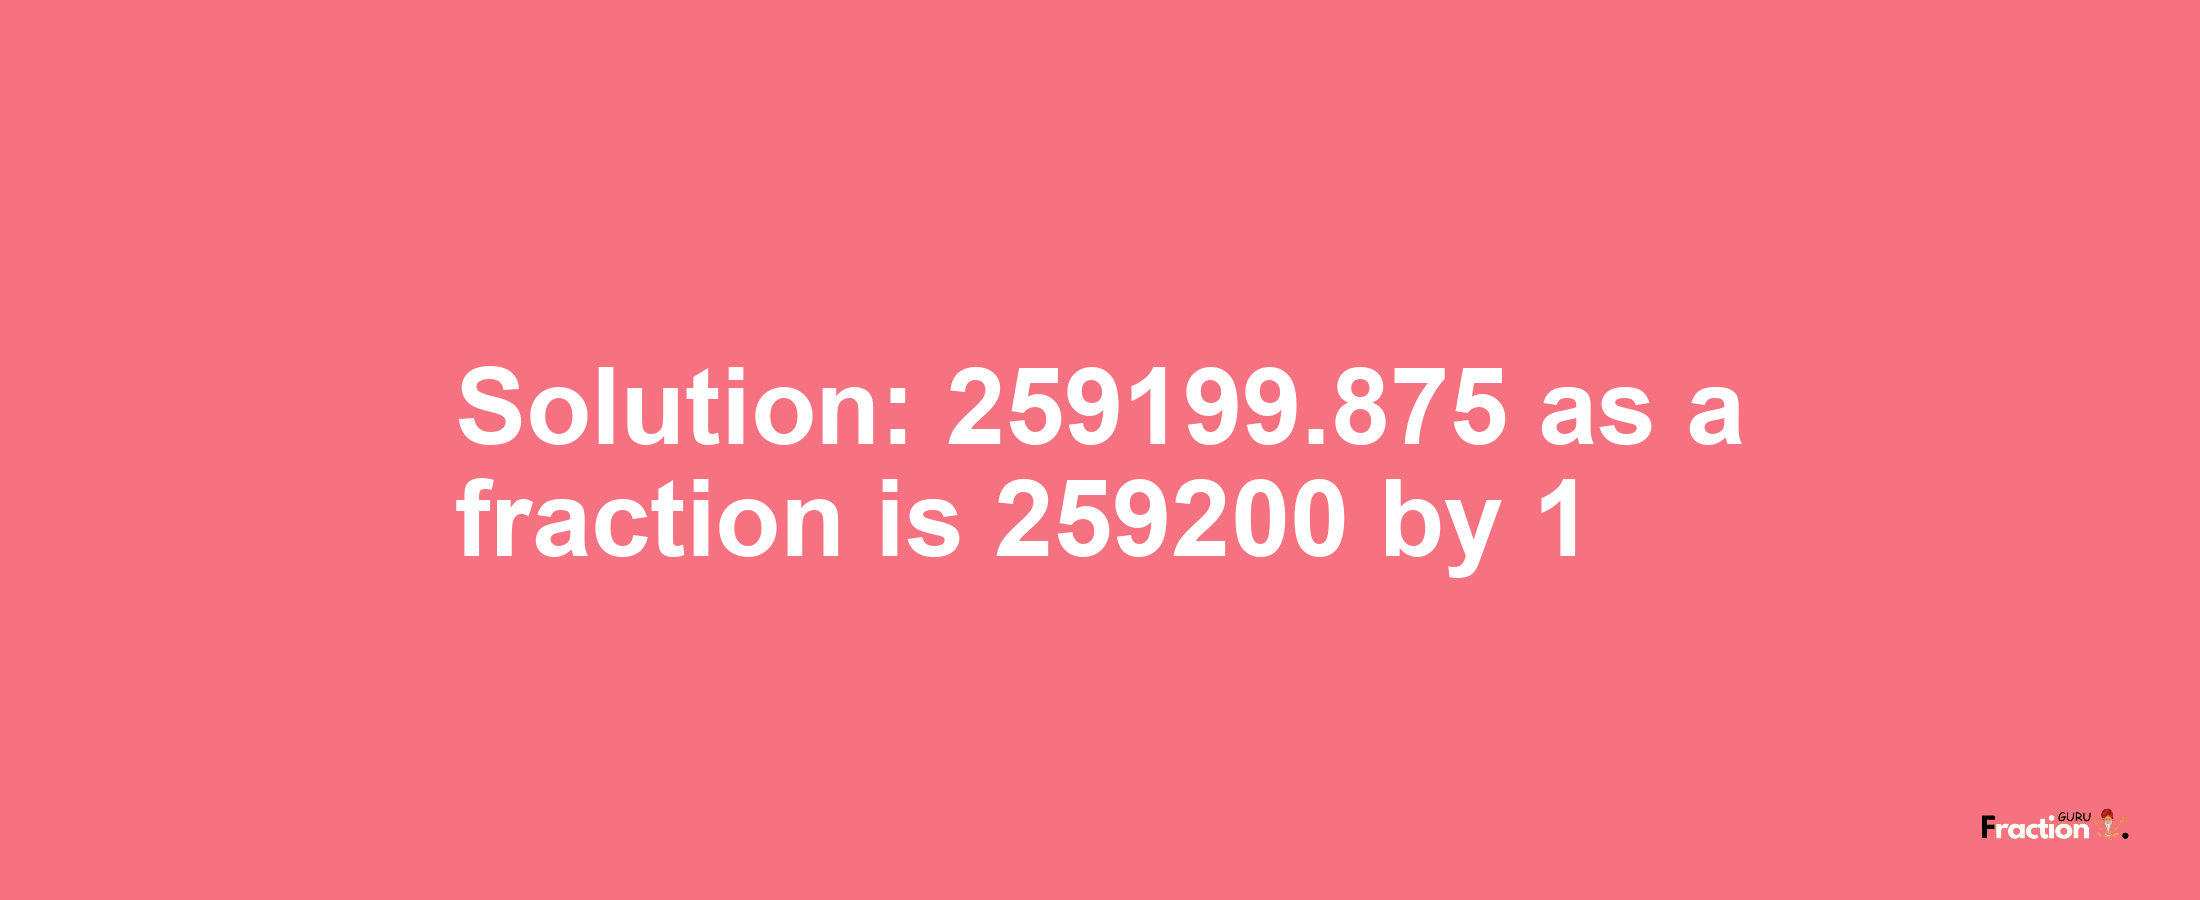 Solution:259199.875 as a fraction is 259200/1